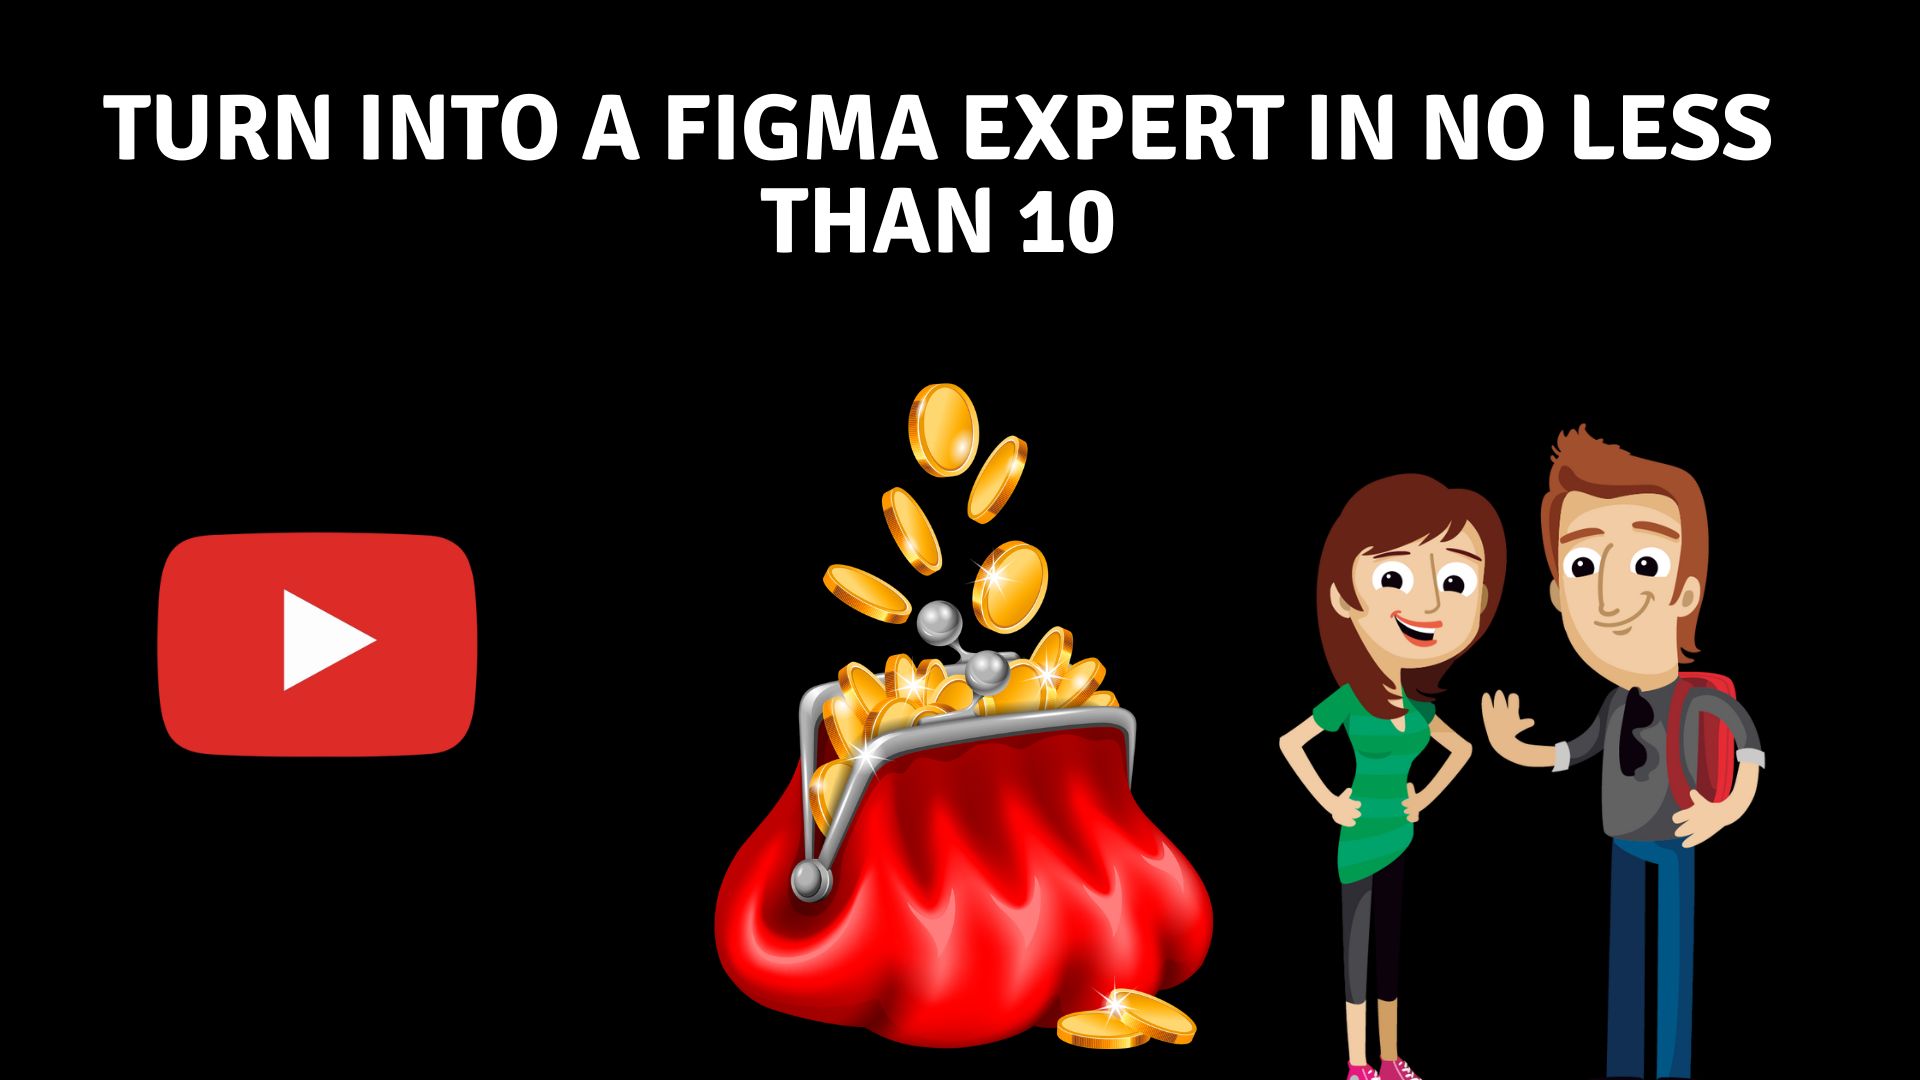 Turn into a figma expert in no less than 10 hours of tomfoolery and reasonable illustrations